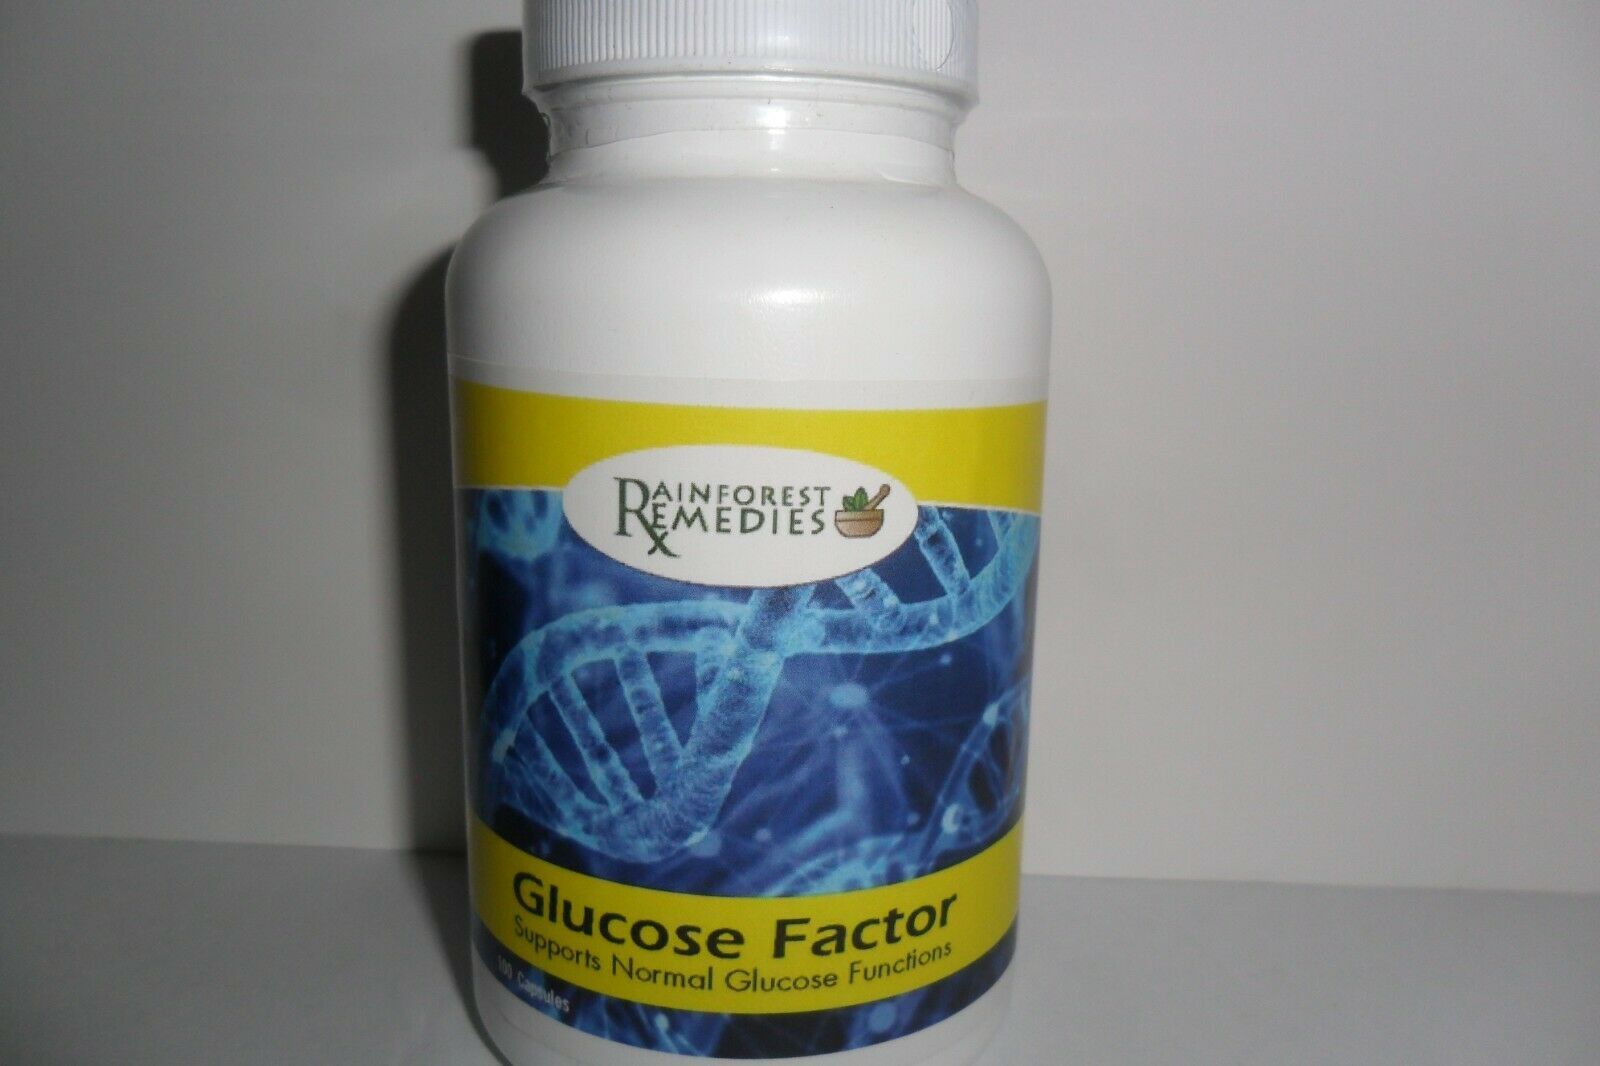 Glucose Factor Support Normal  Glucose Functions  by Rainforest Remedies